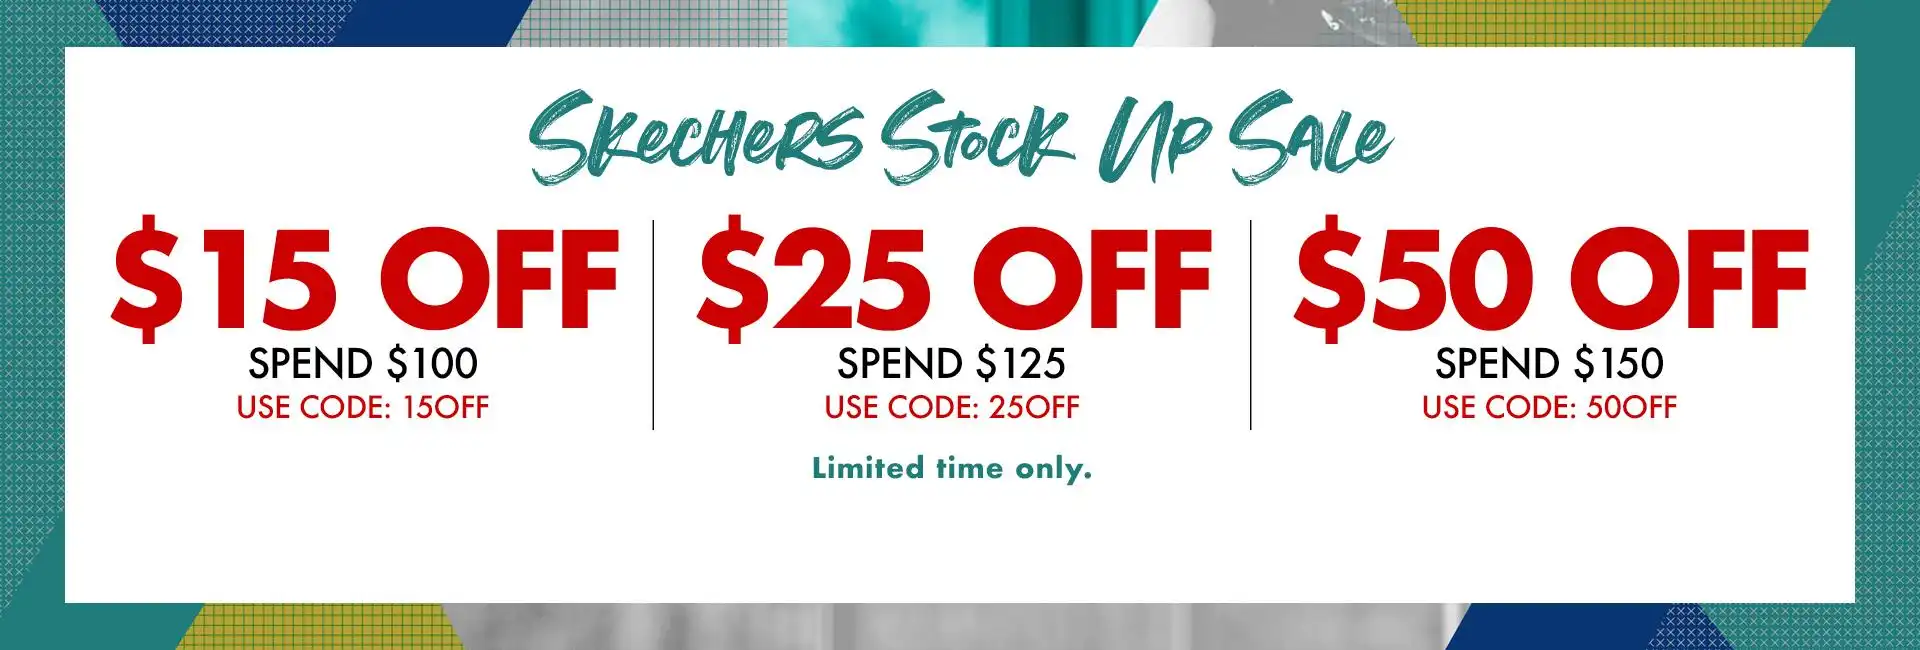 Spend & Save - Extra Up to $50 OFF